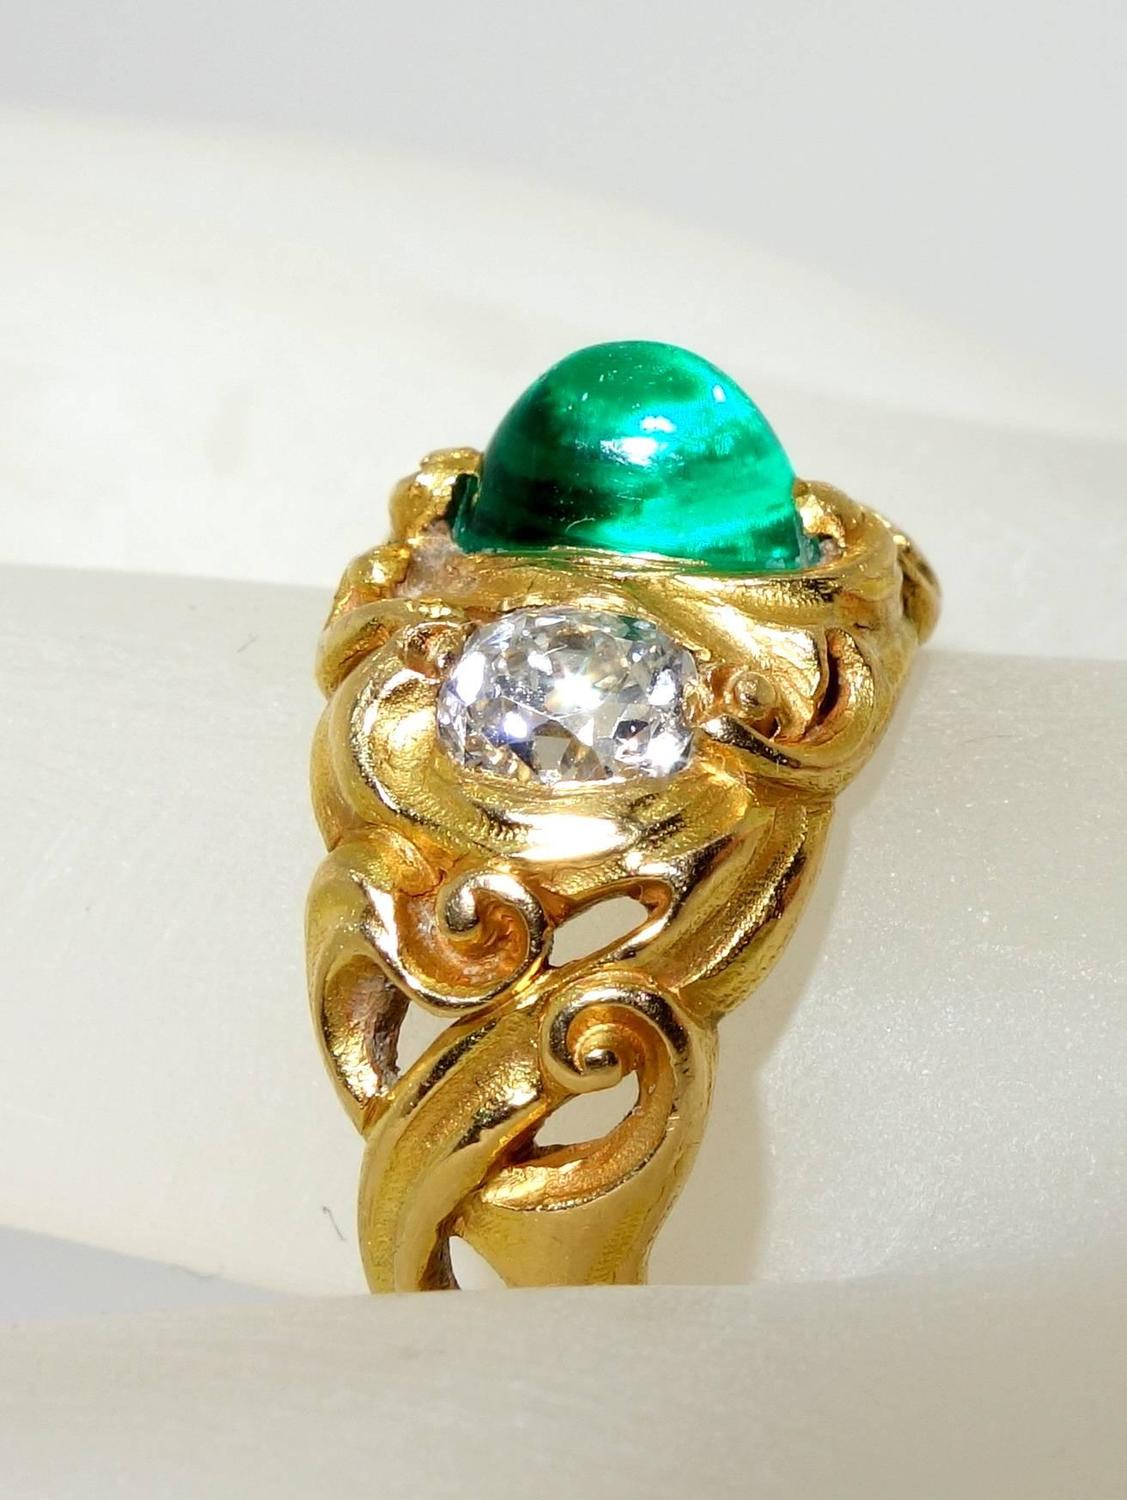 1900 Art Nouveau Emerald Diamond Gold Ring For Sale at 1stdibs